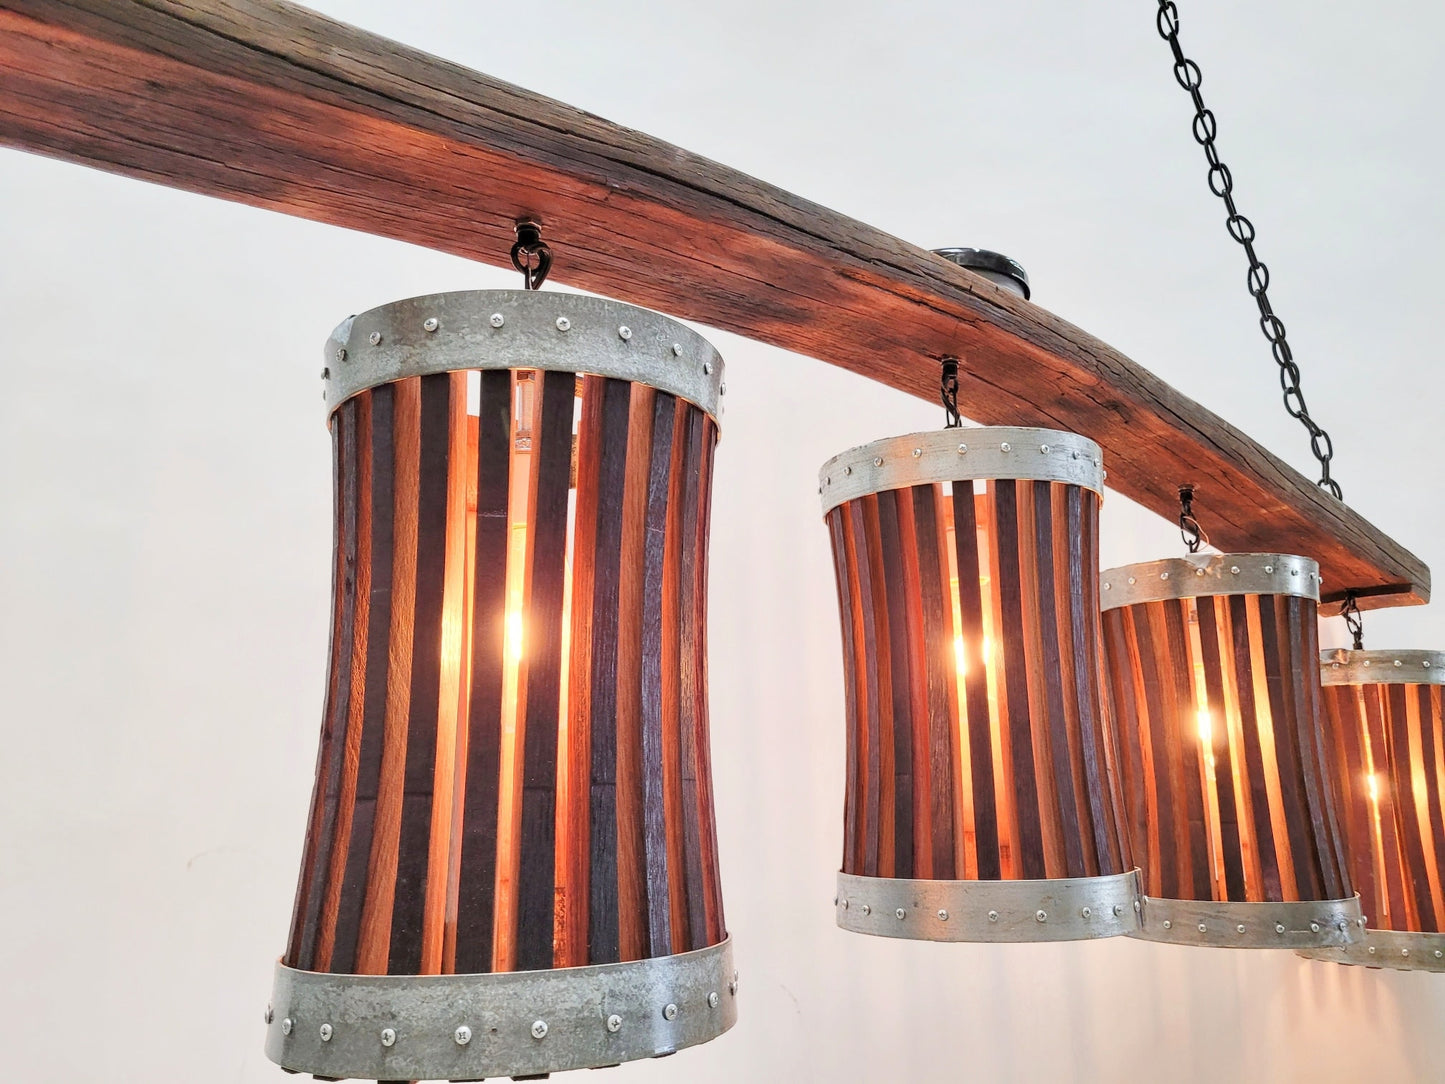 Wine Barrel Chandelier - Sambreel - Made from retired California Wine Barrels + Rings. 100% Recycled!